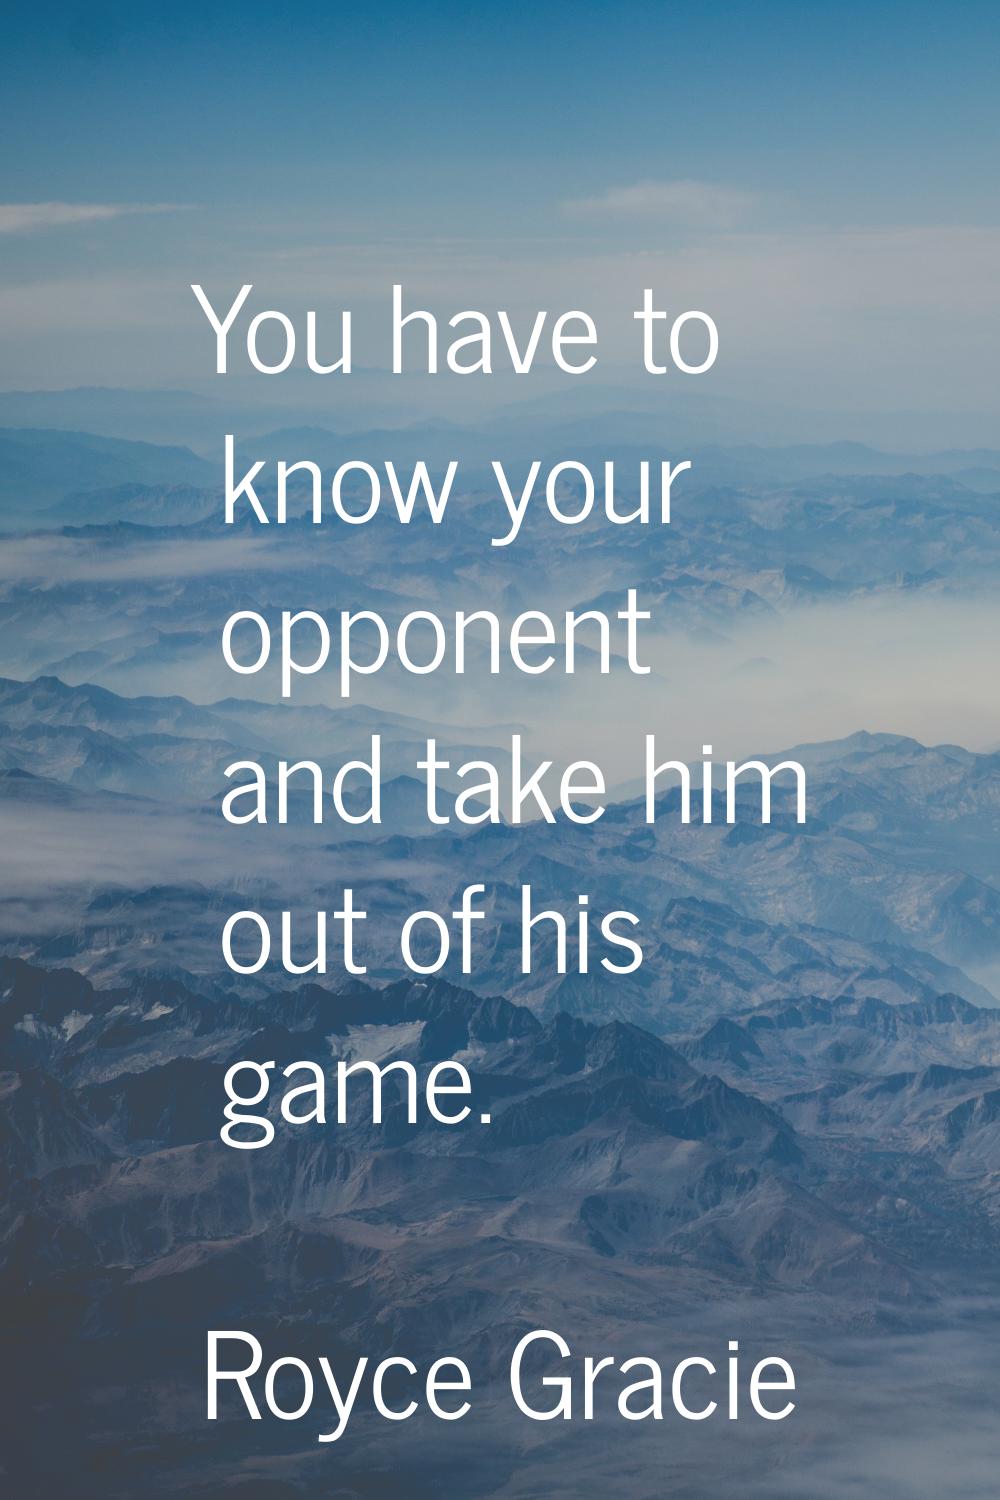 You have to know your opponent and take him out of his game.